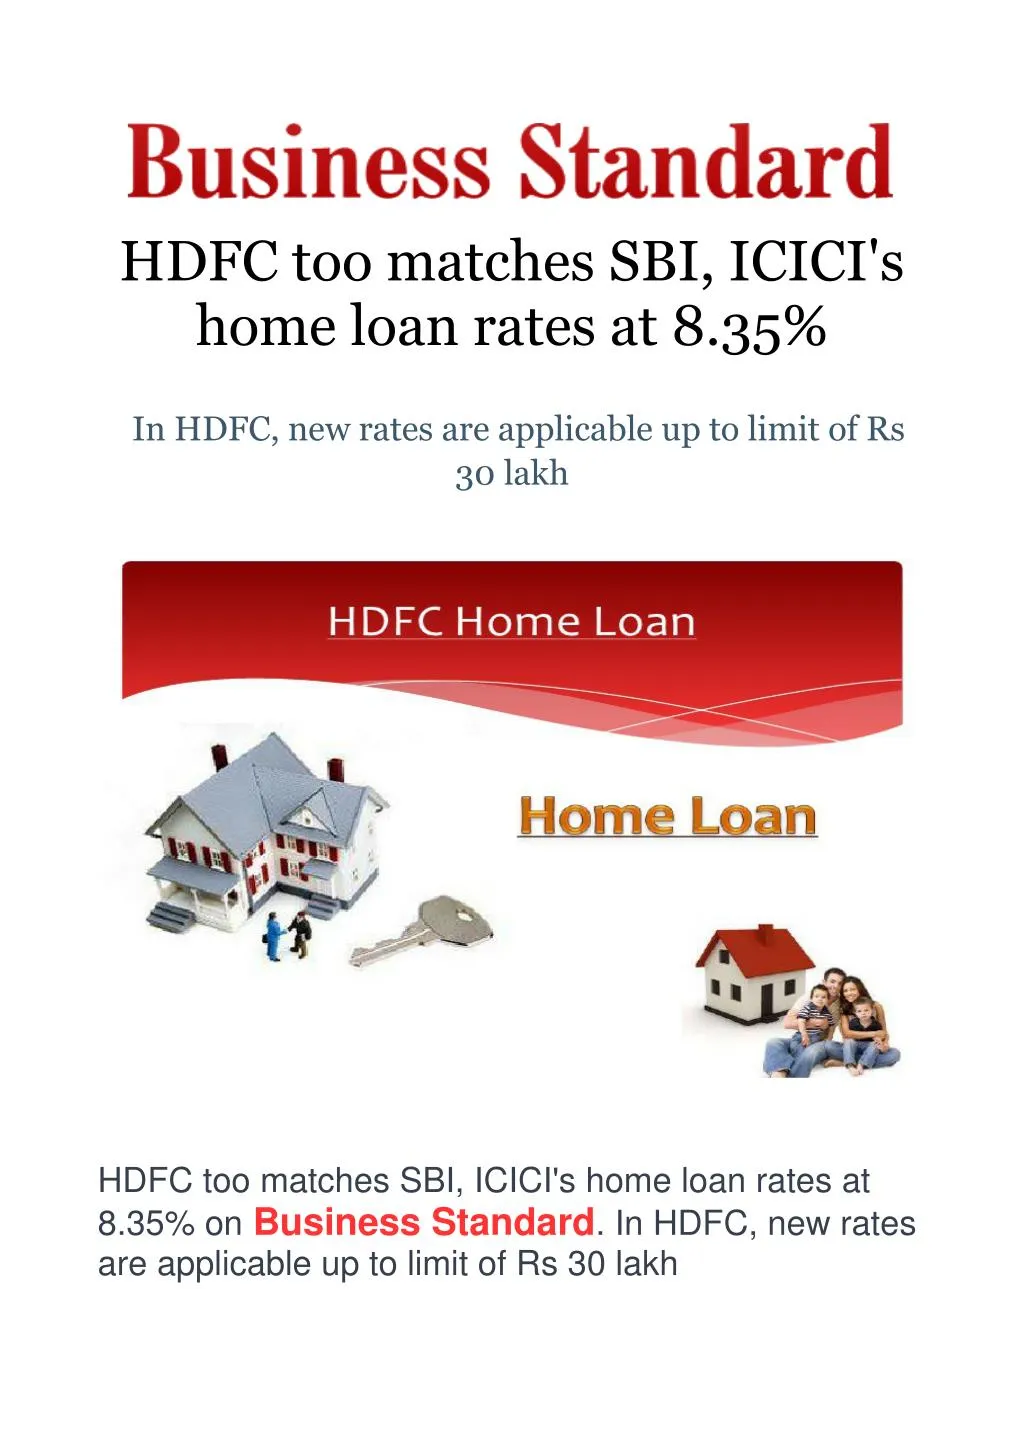 Ppt Hdfc Too Matches Sbi Icicis Home Loan Rates At 835 Powerpoint Presentation Id7579899 8232